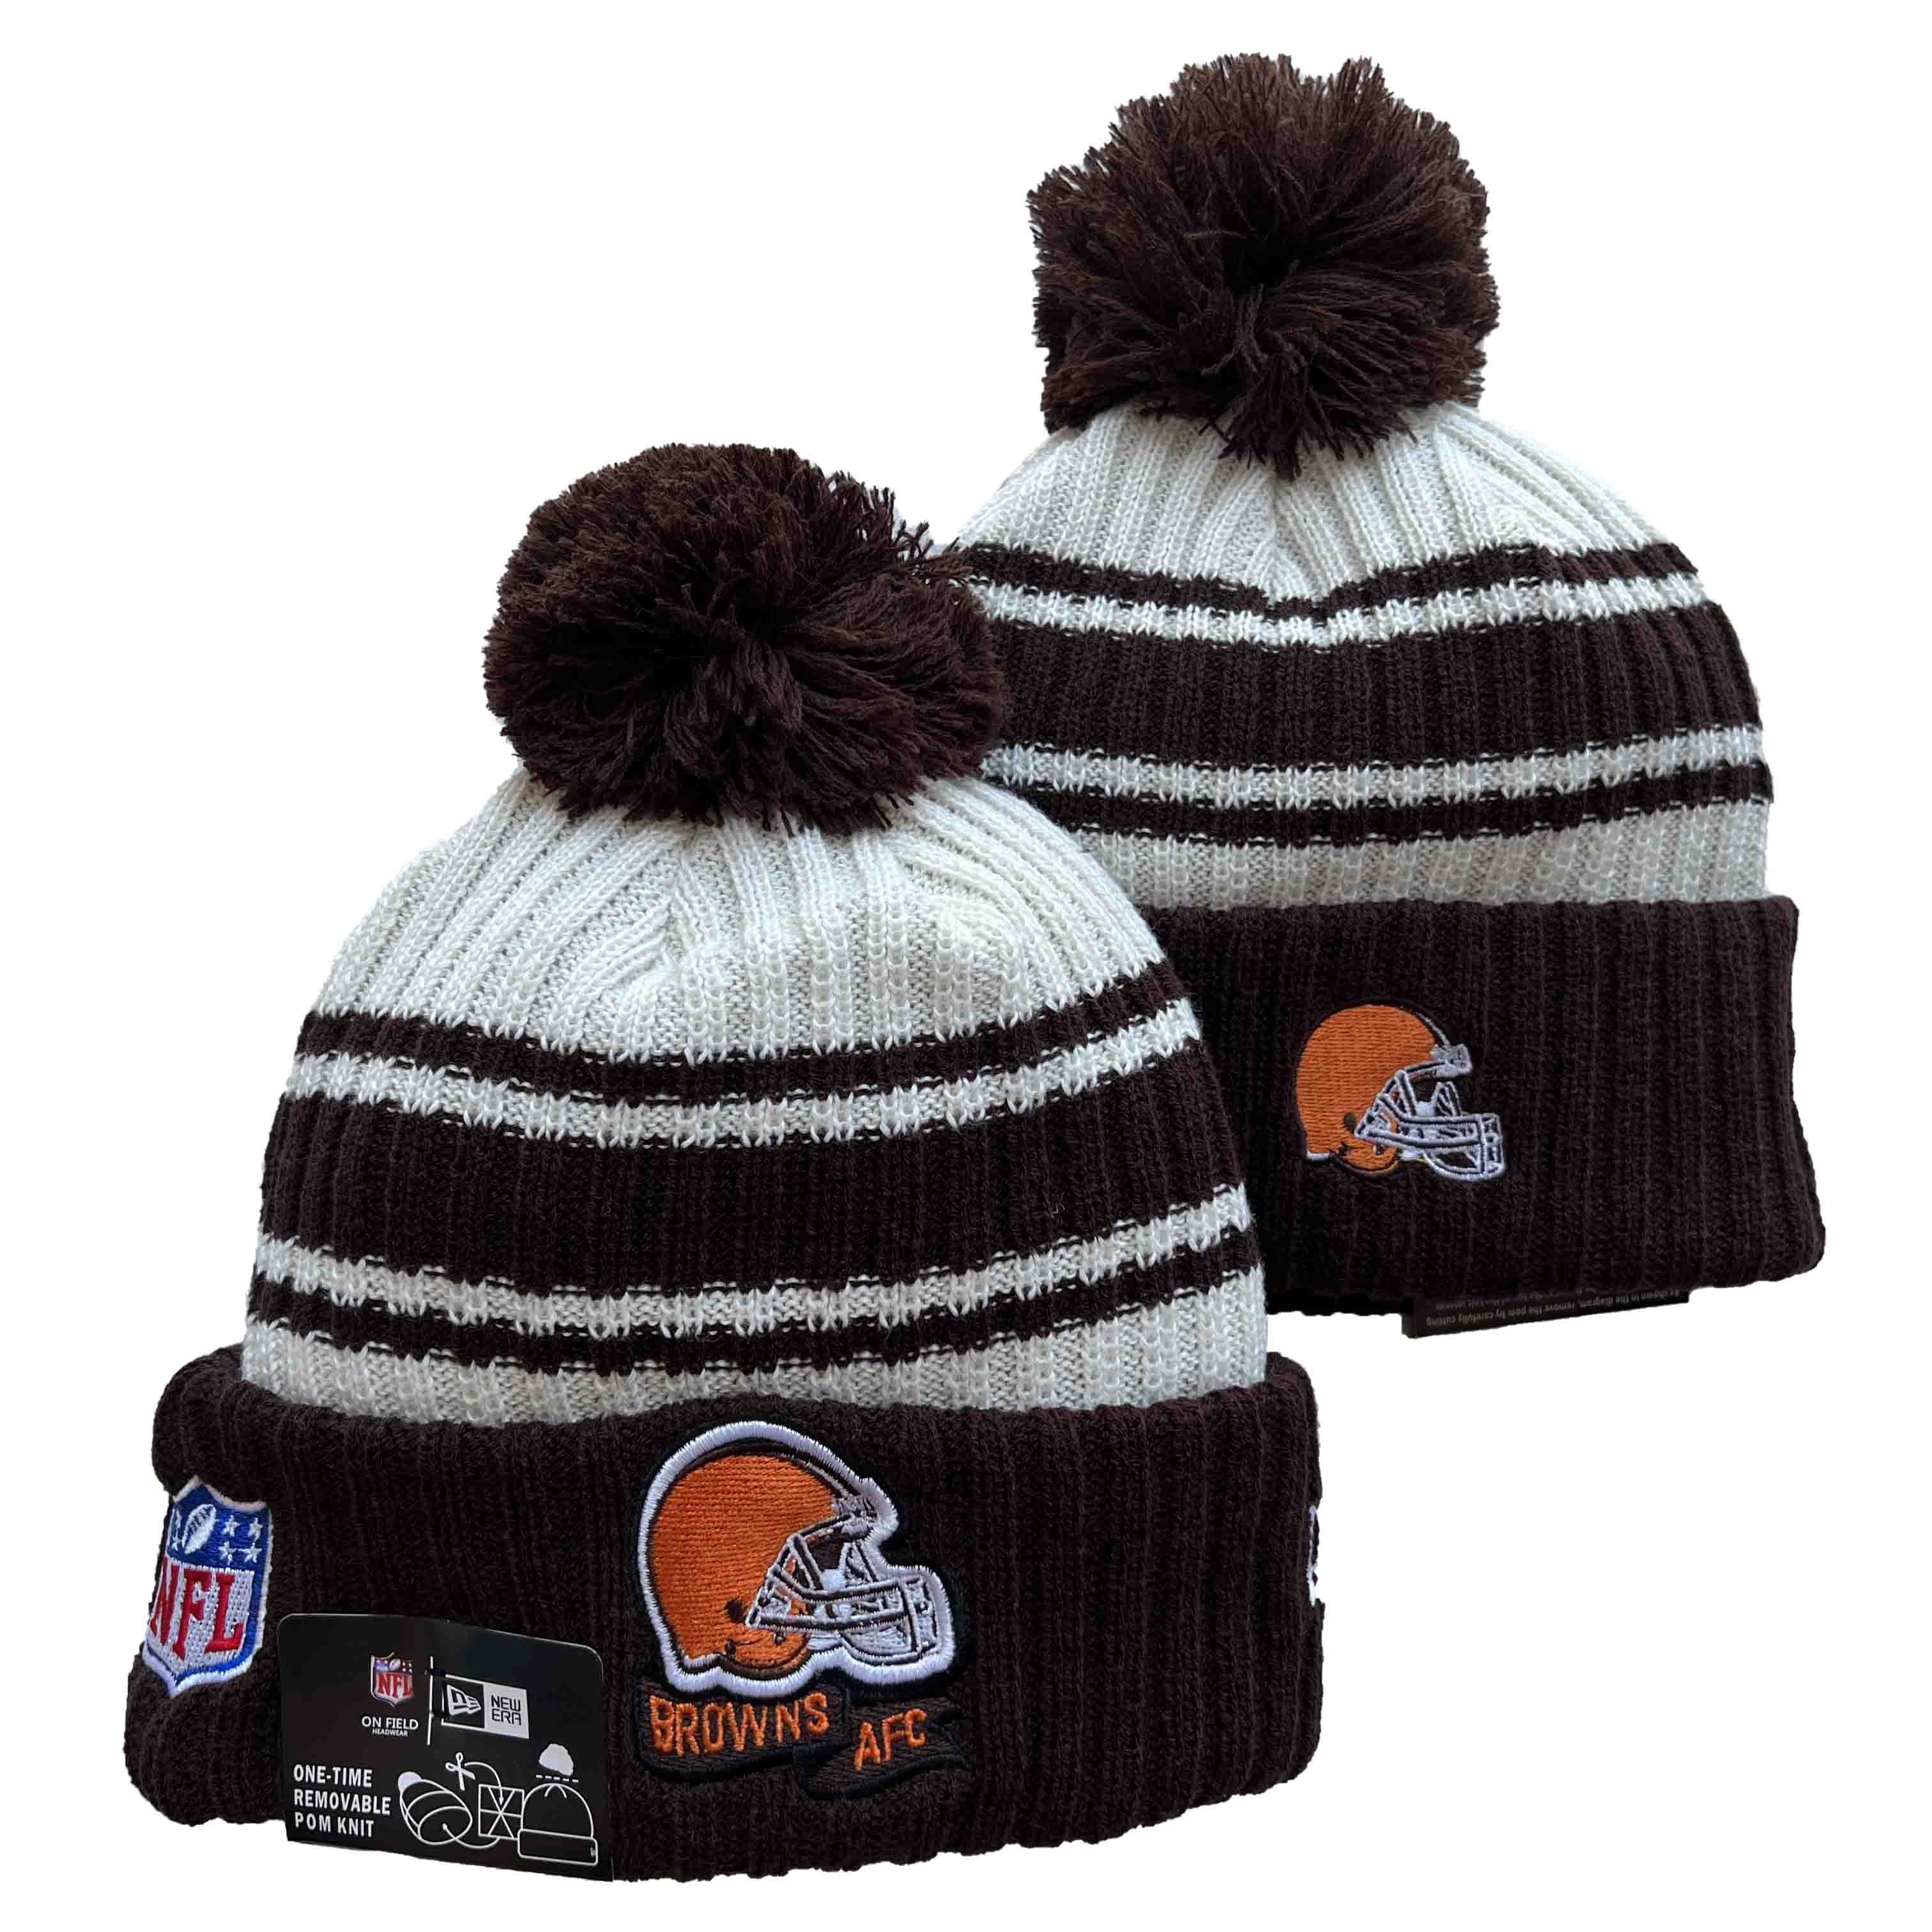 NFL Cleveland Browns Beanies Knit Hats-YD1305